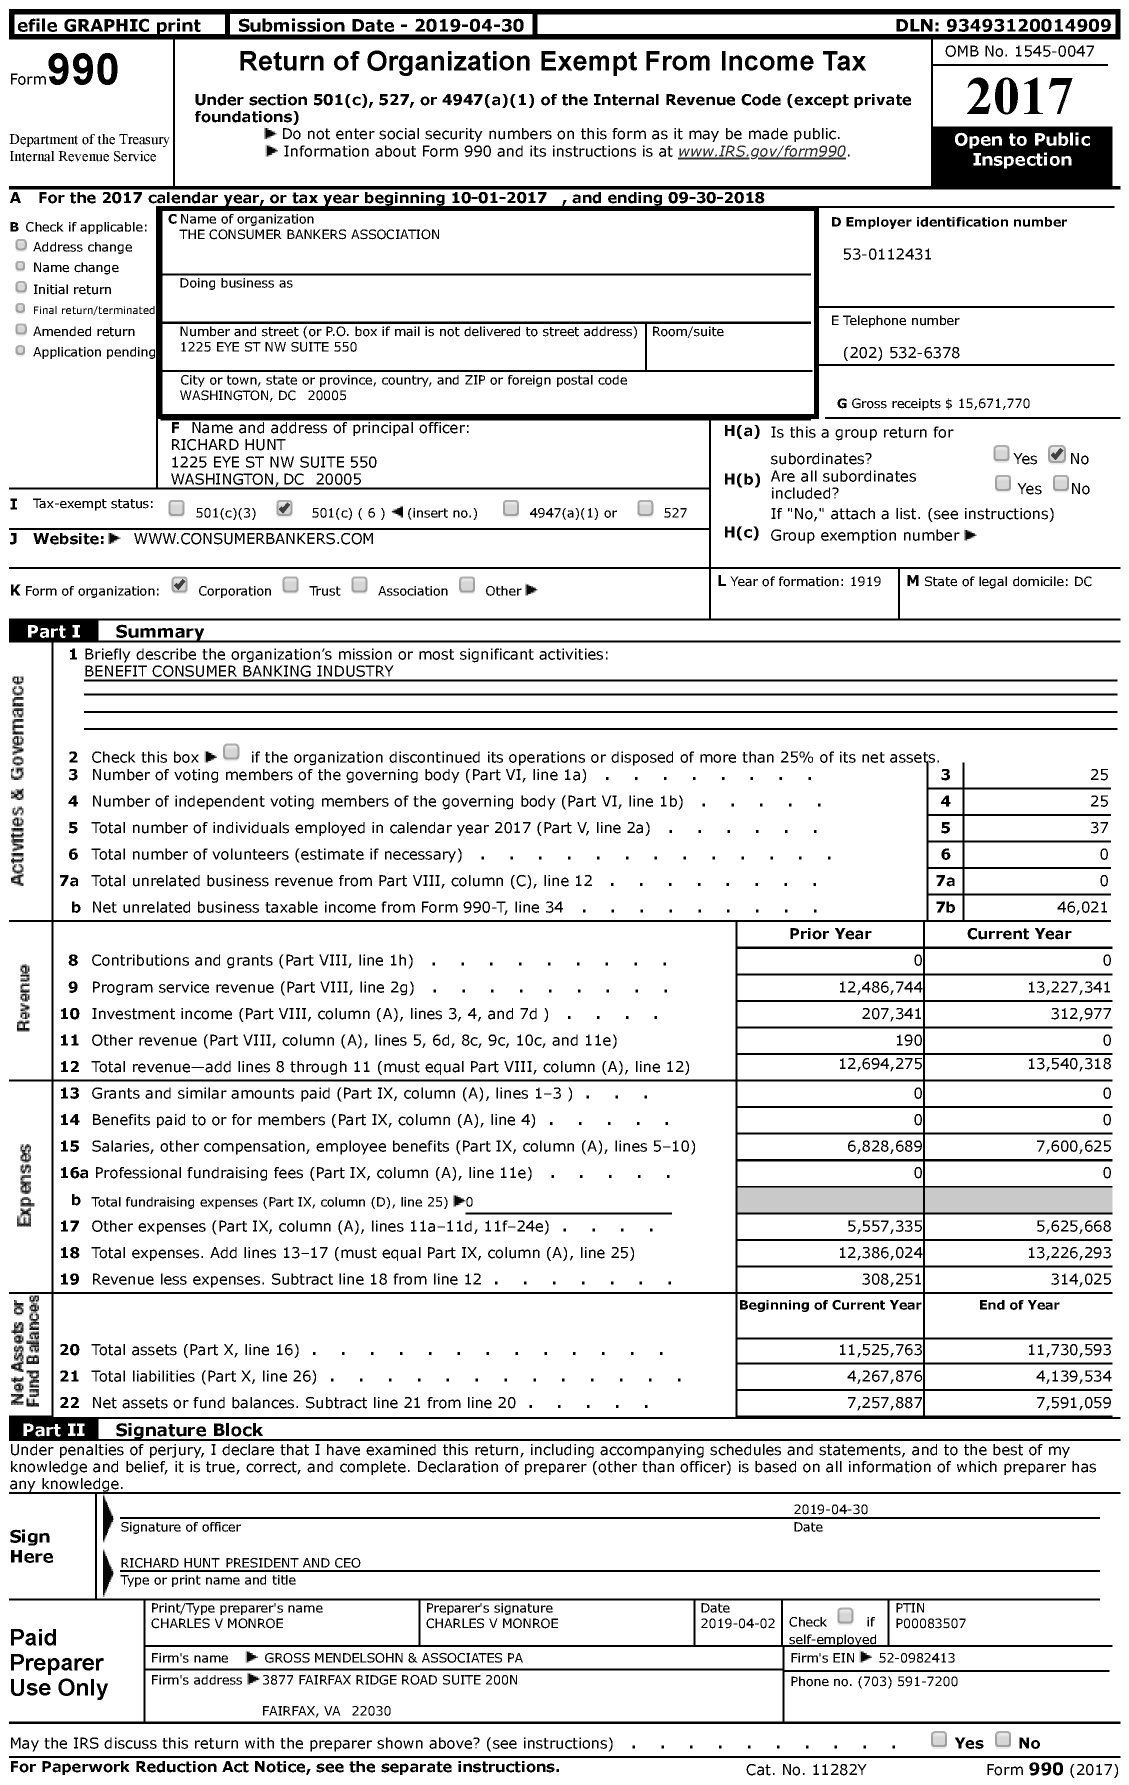 Image of first page of 2017 Form 990 for The Consumer Bankers Association (CBA)